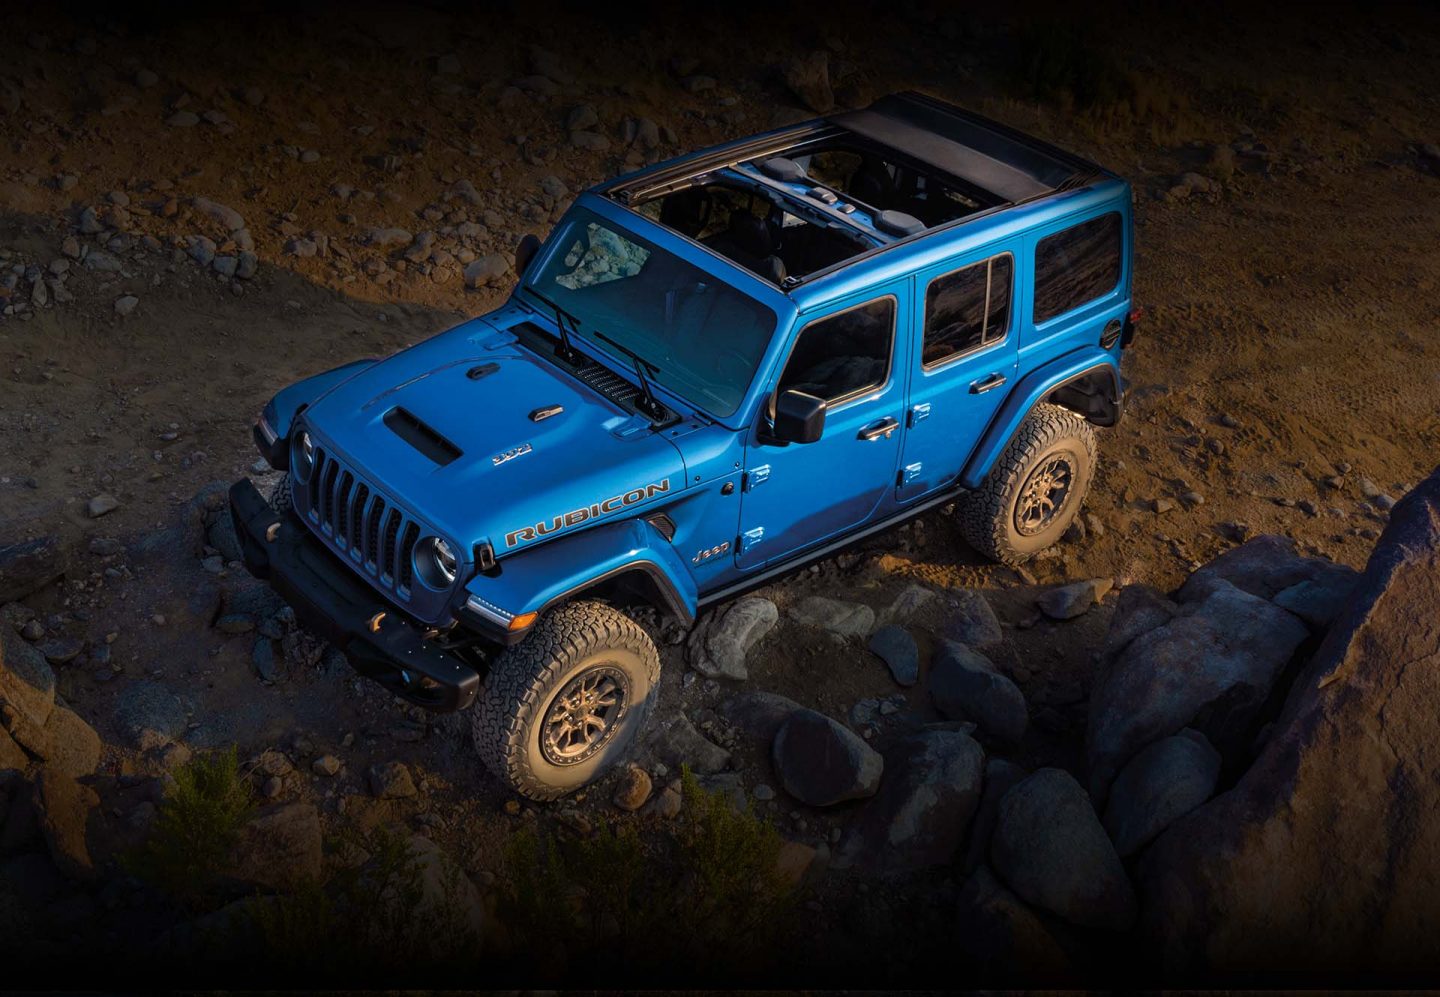 The 2023 Jeep Wrangler Rubicon 392 with its Sky One-Touch Power Top open as it is driven up a rocky slope.